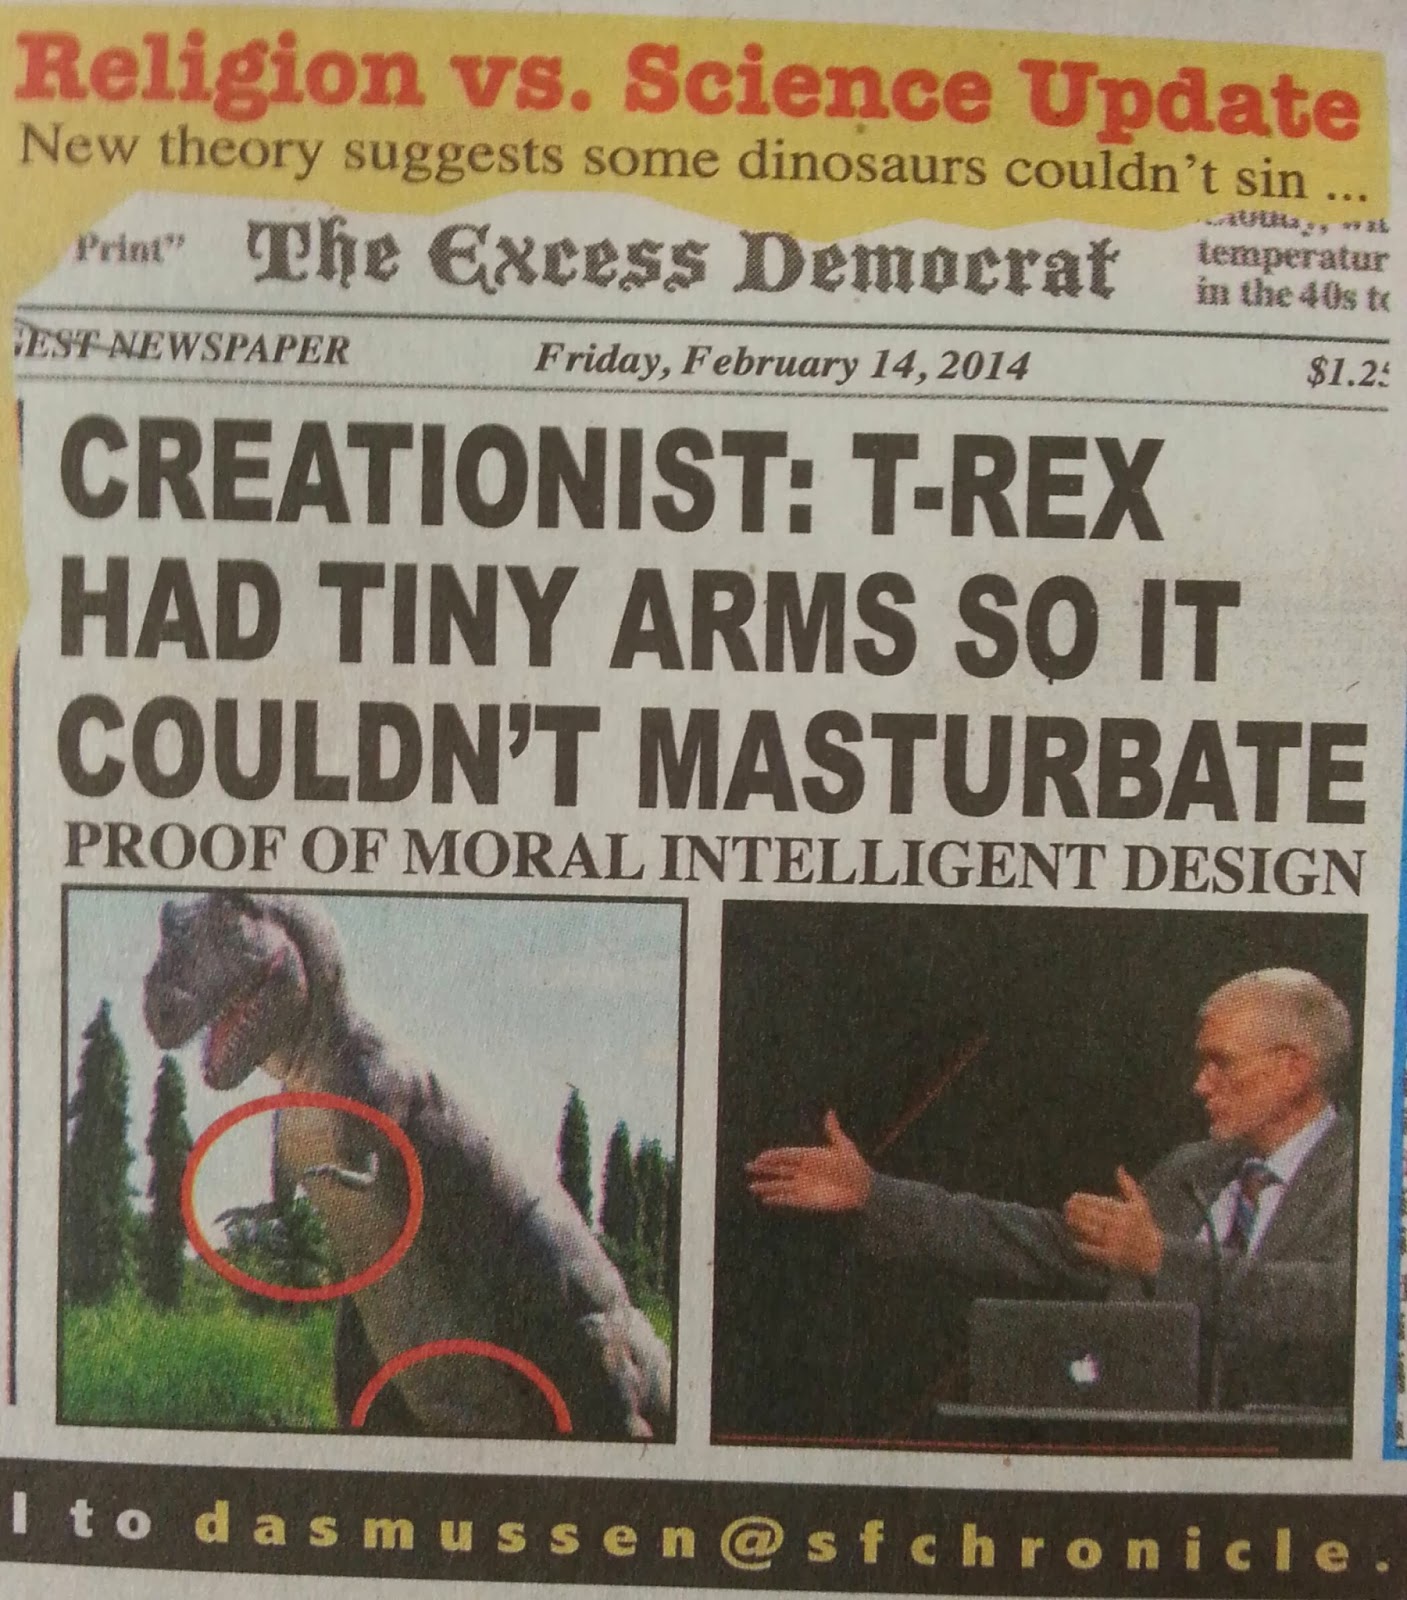 Funny Religion Science Creationist Dinosaur Article - New theory suggests some dinosaurs couldn't sin